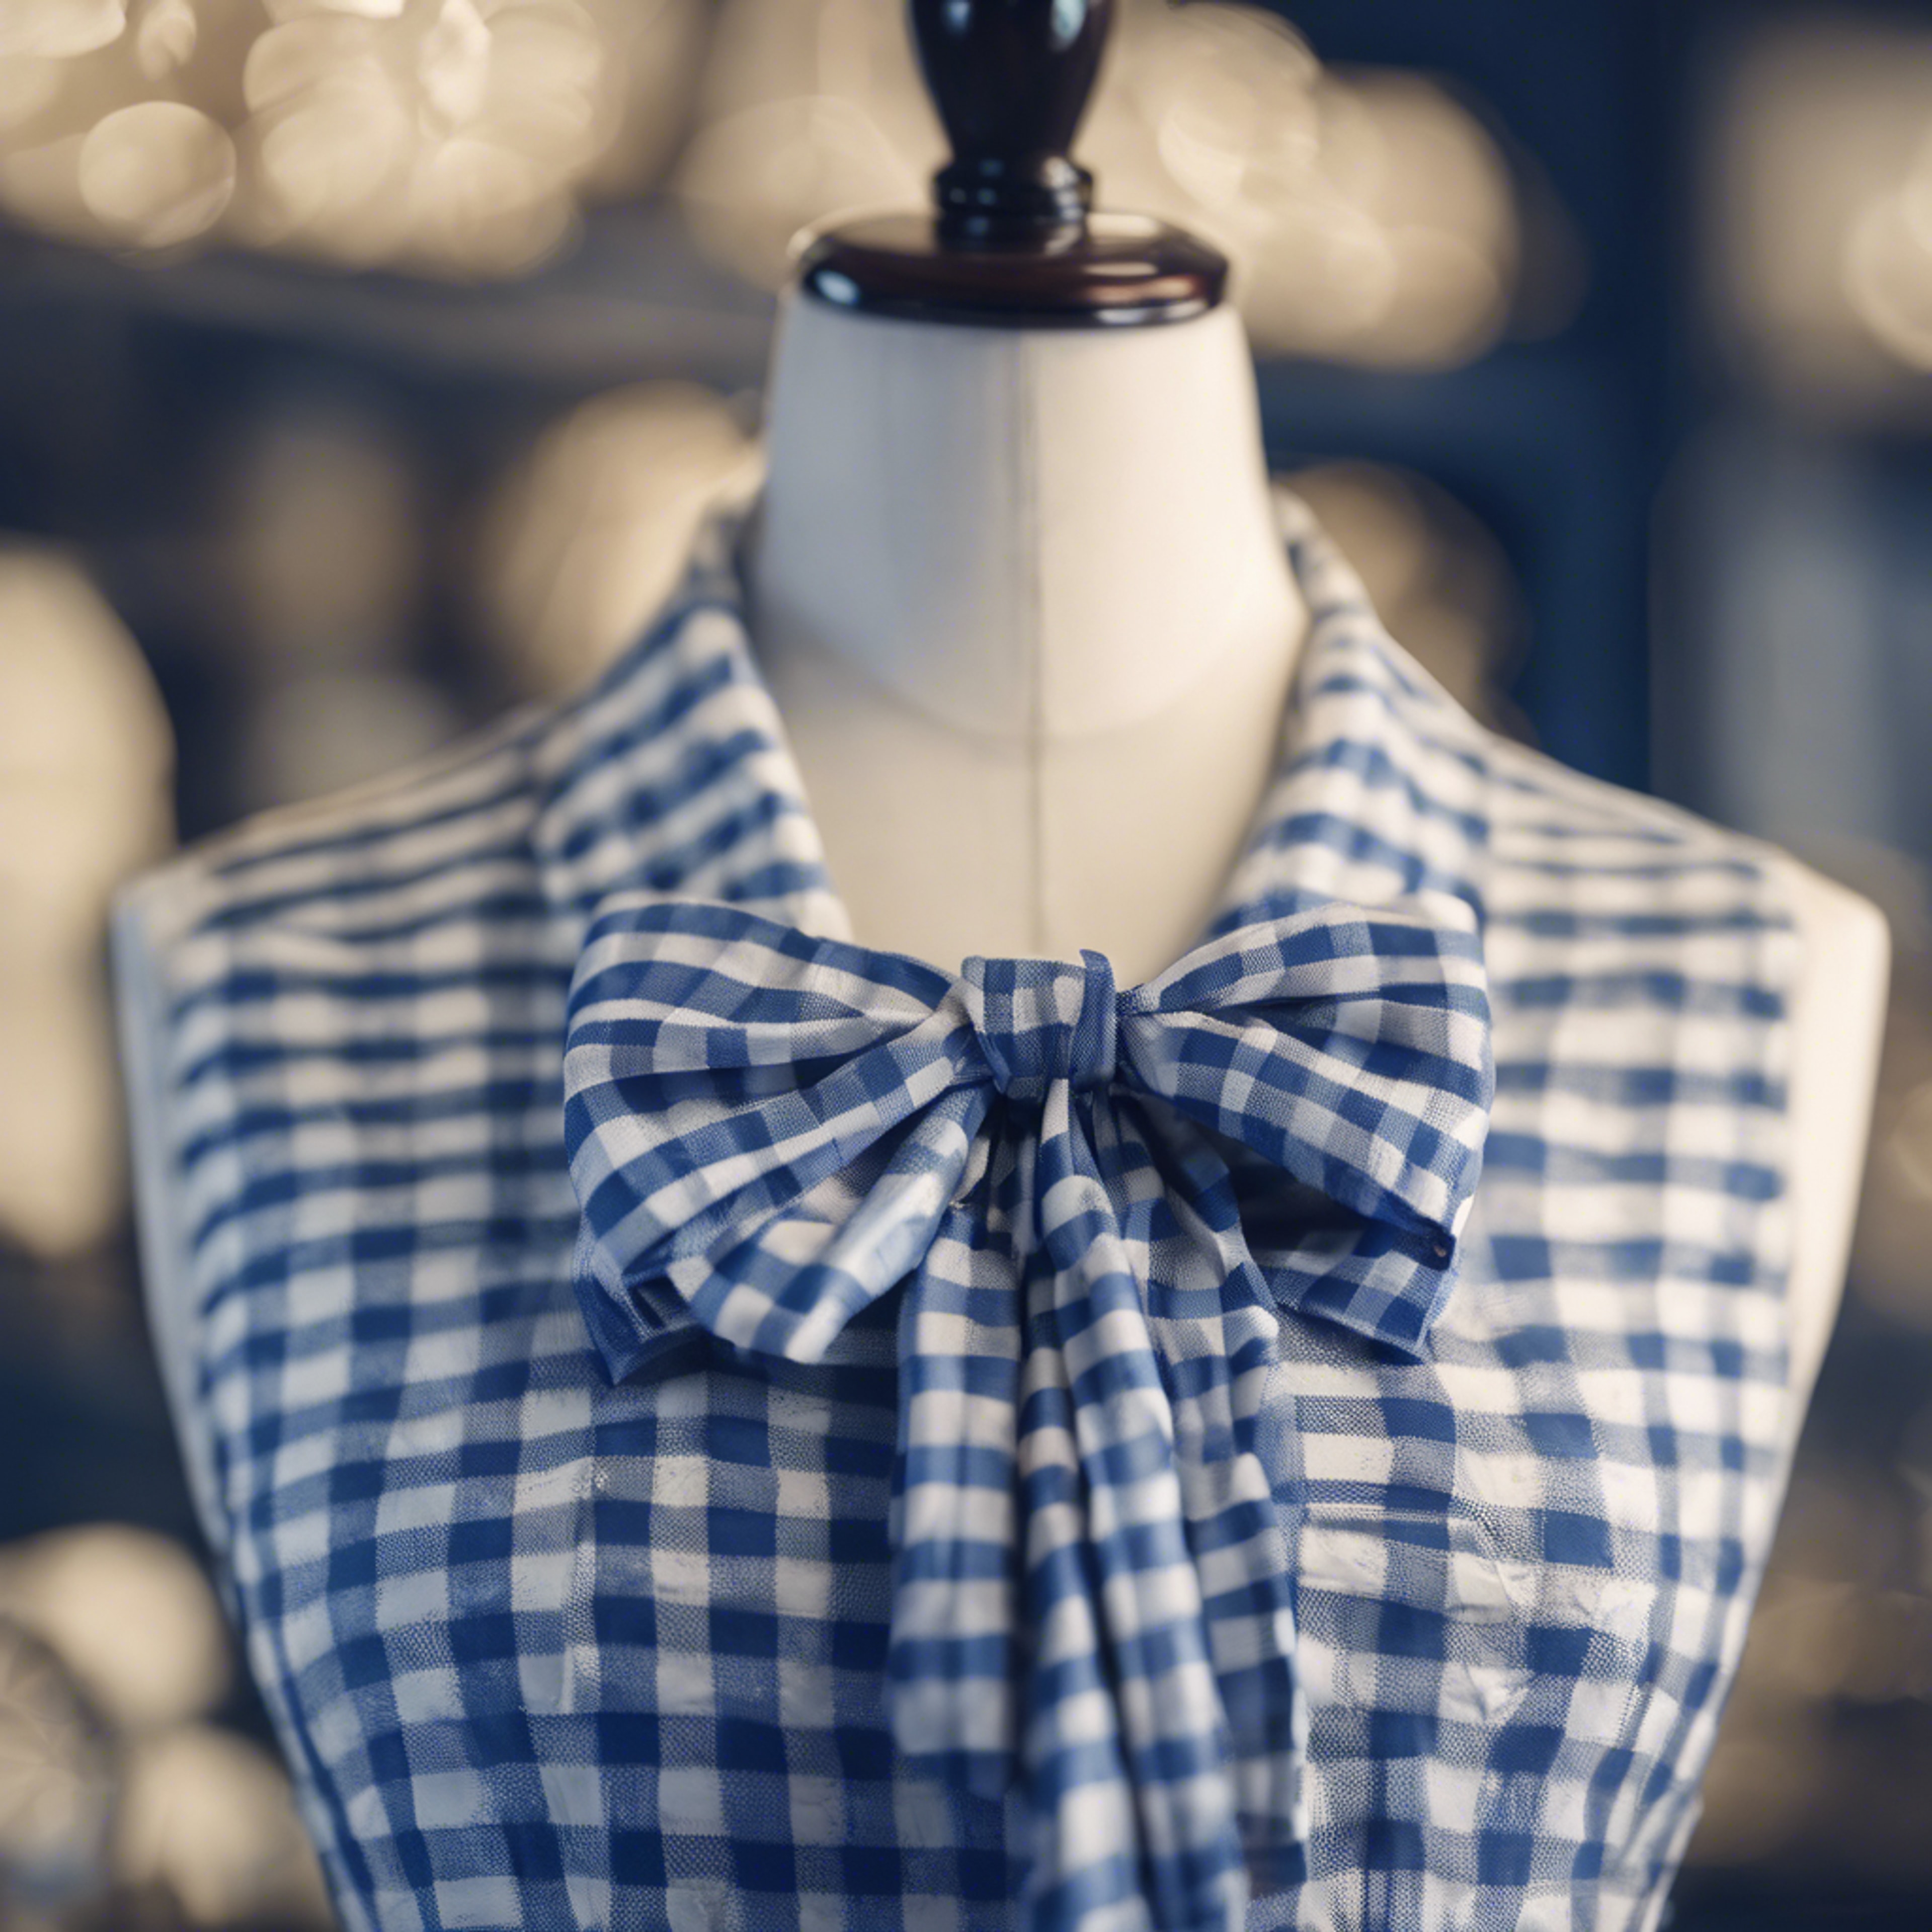 A preppy style blue and white chequered dress with a neatly tied bow on a mannequin.” Валлпапер[2cff79e4d79d40c780d3]